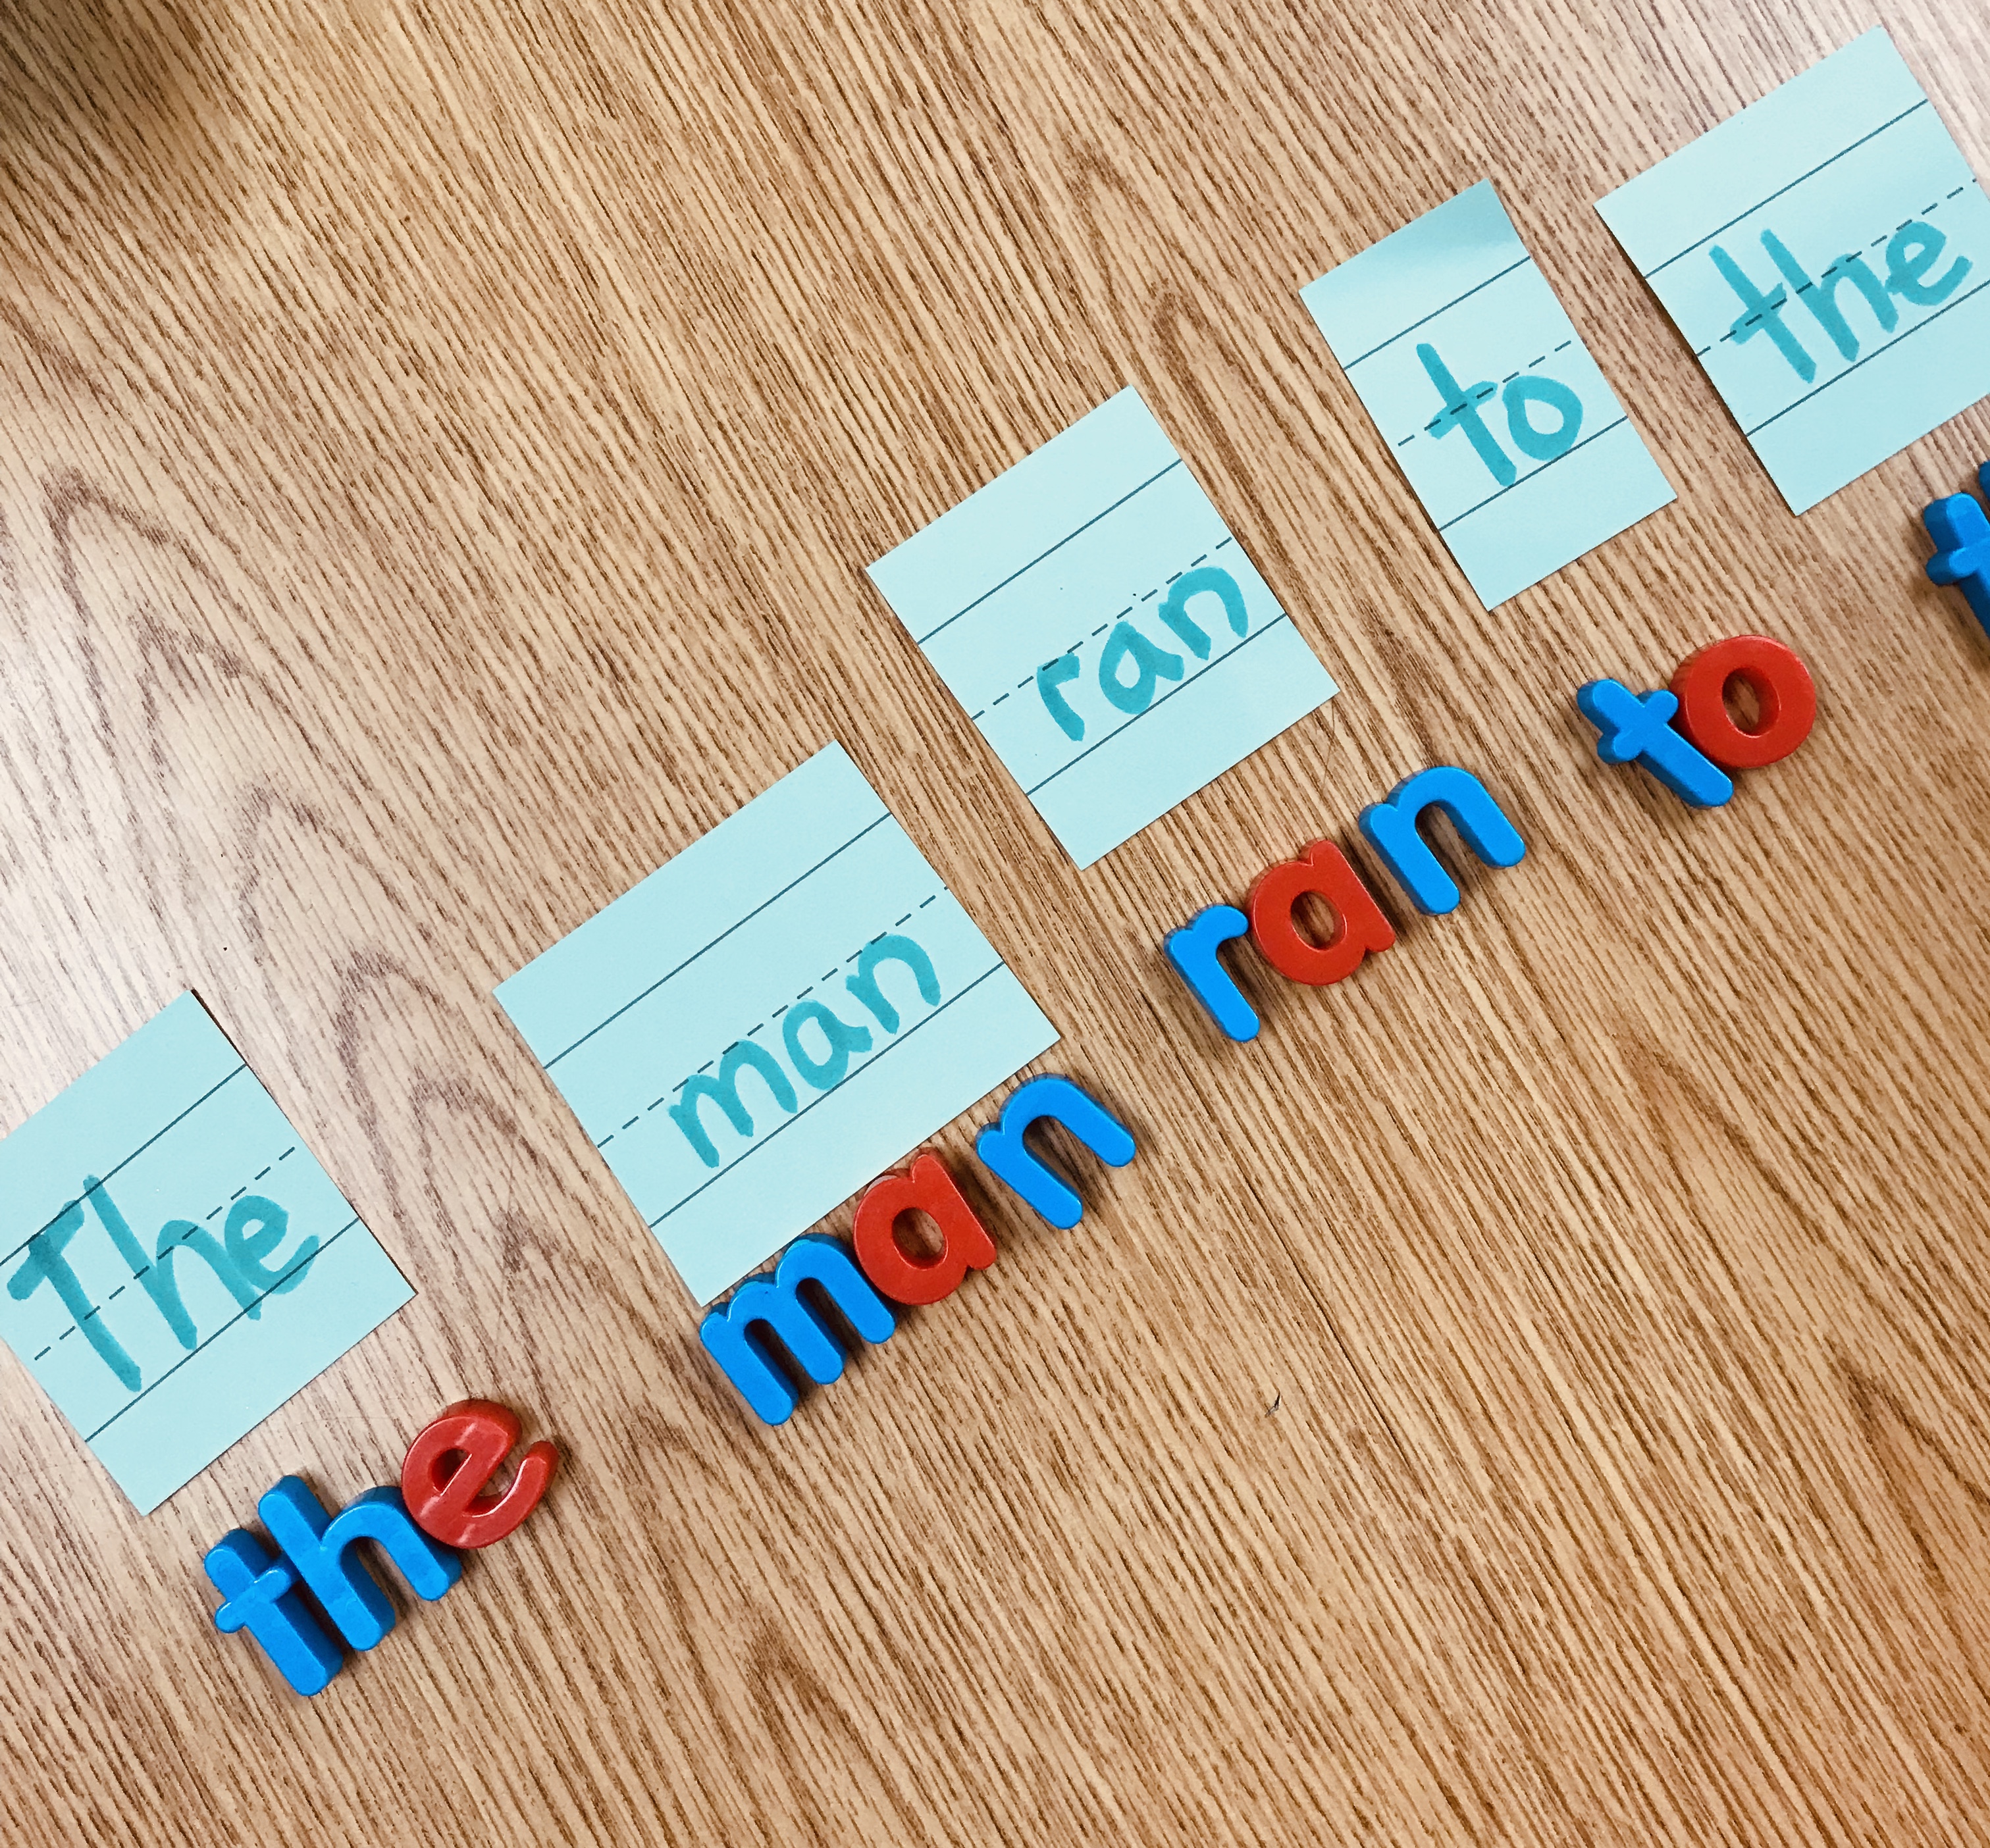 Paper with words and alphabet magnets